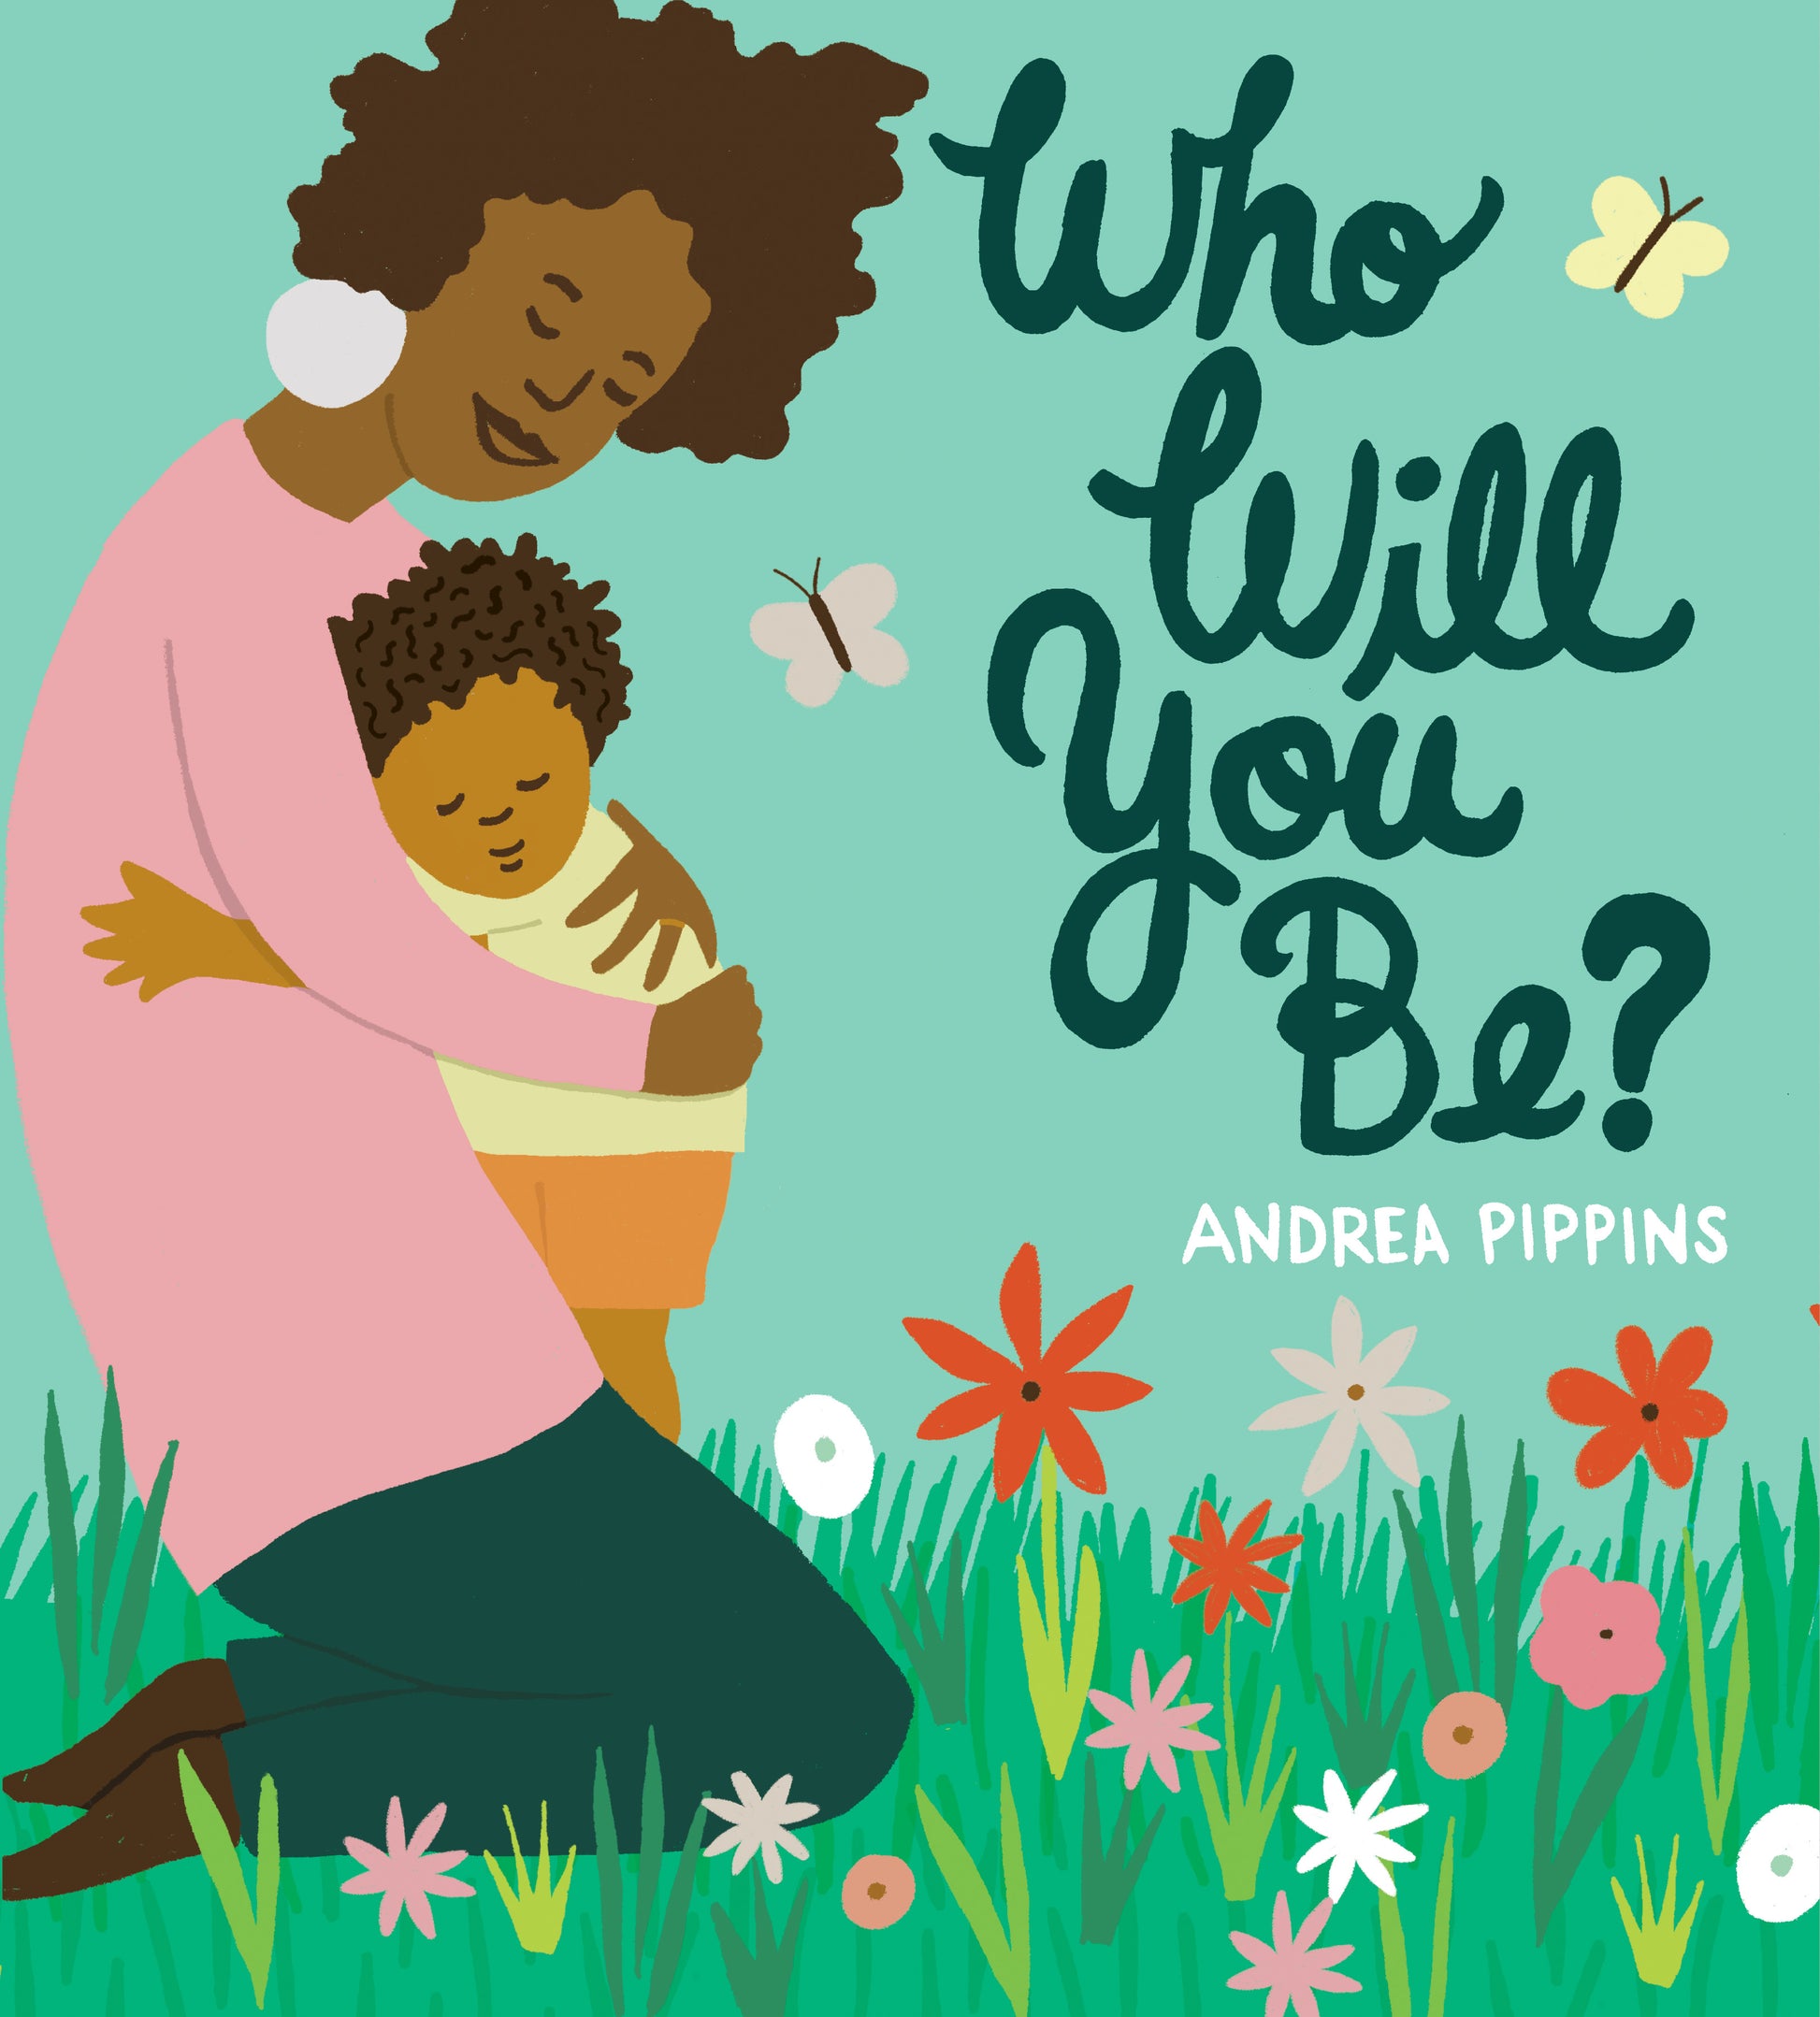 Who Will You Be? by Andrea Pippins.  A mother kneels in the grass among flowers, hugging her child. 